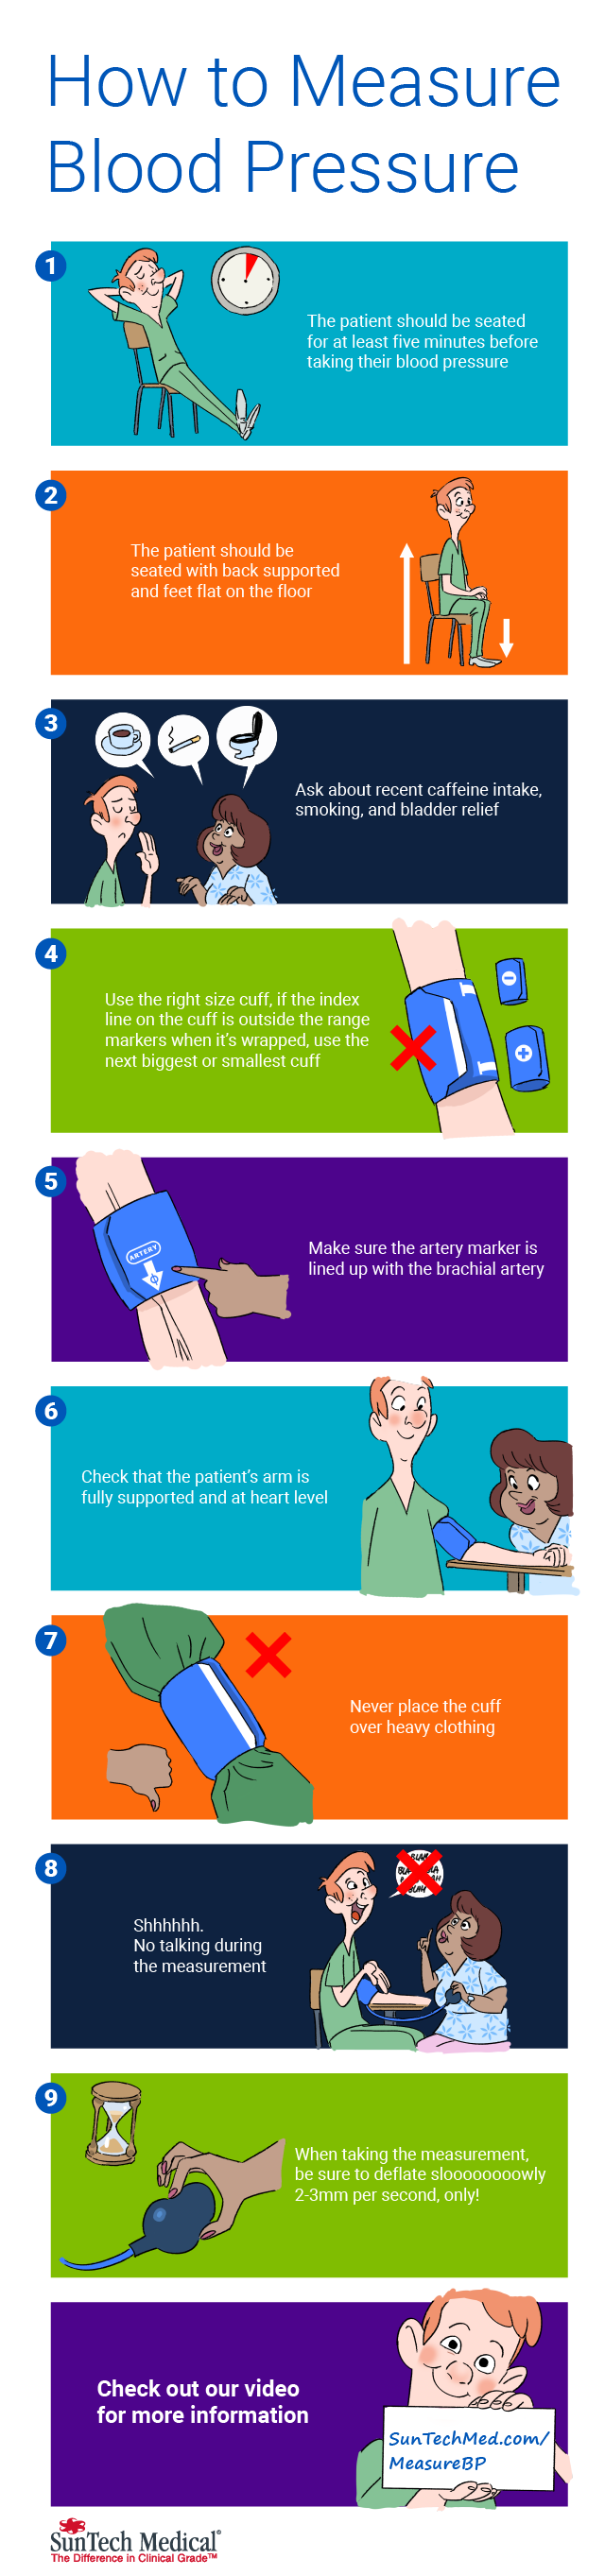 How to Measure Blood Pressure Infographic